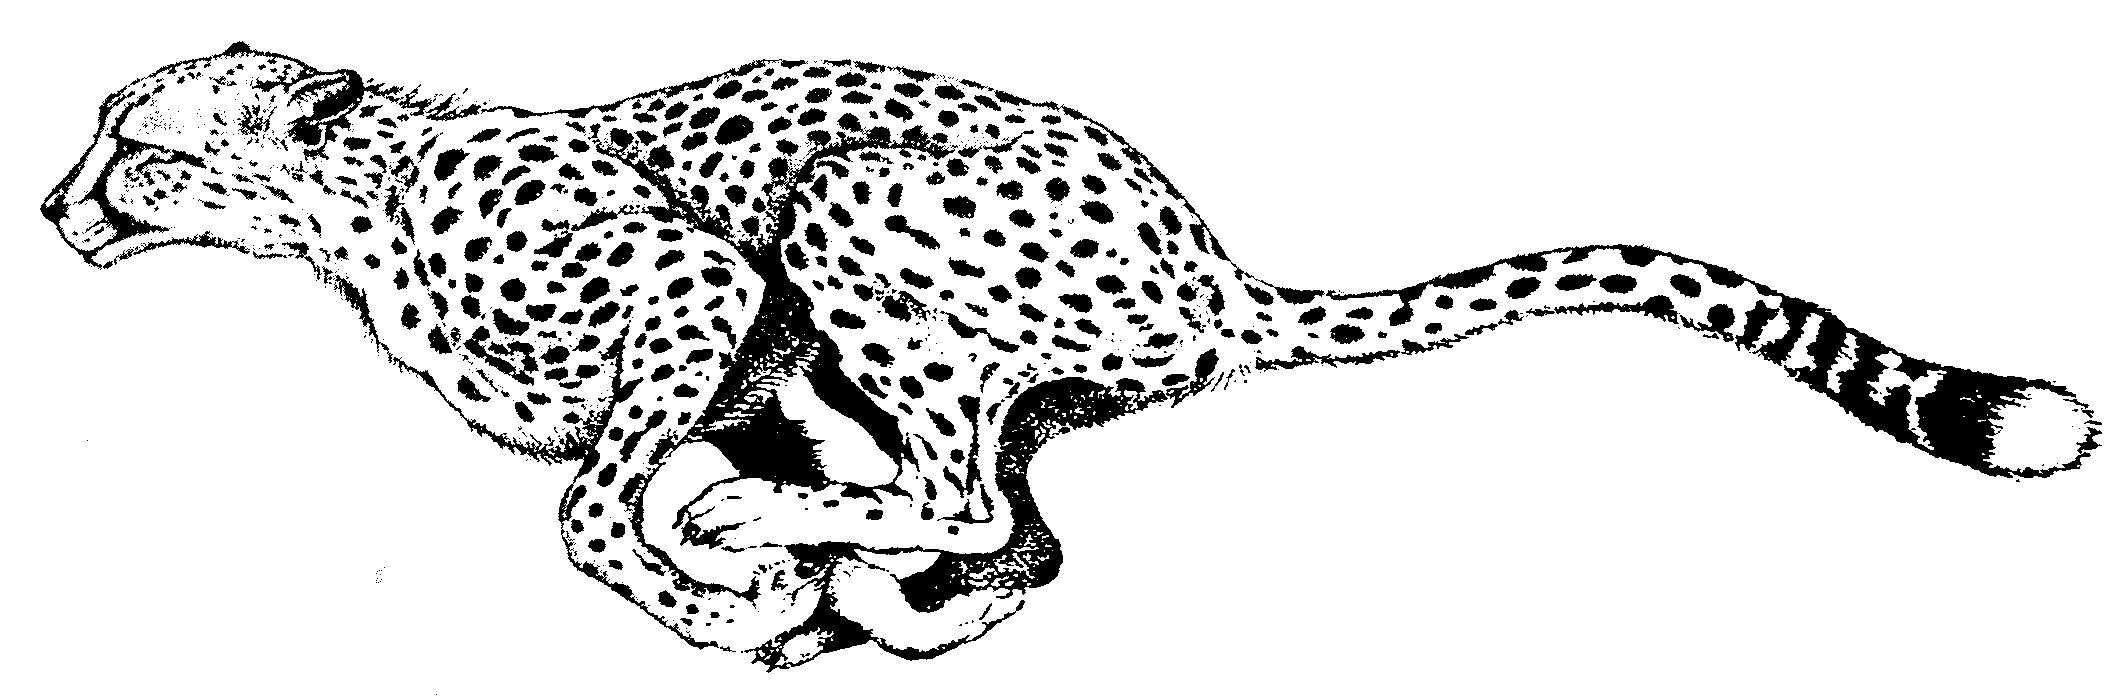 cheetah coloring pages for adults printable coloring page adult coloring page animal coloring adults for cheetah pages 